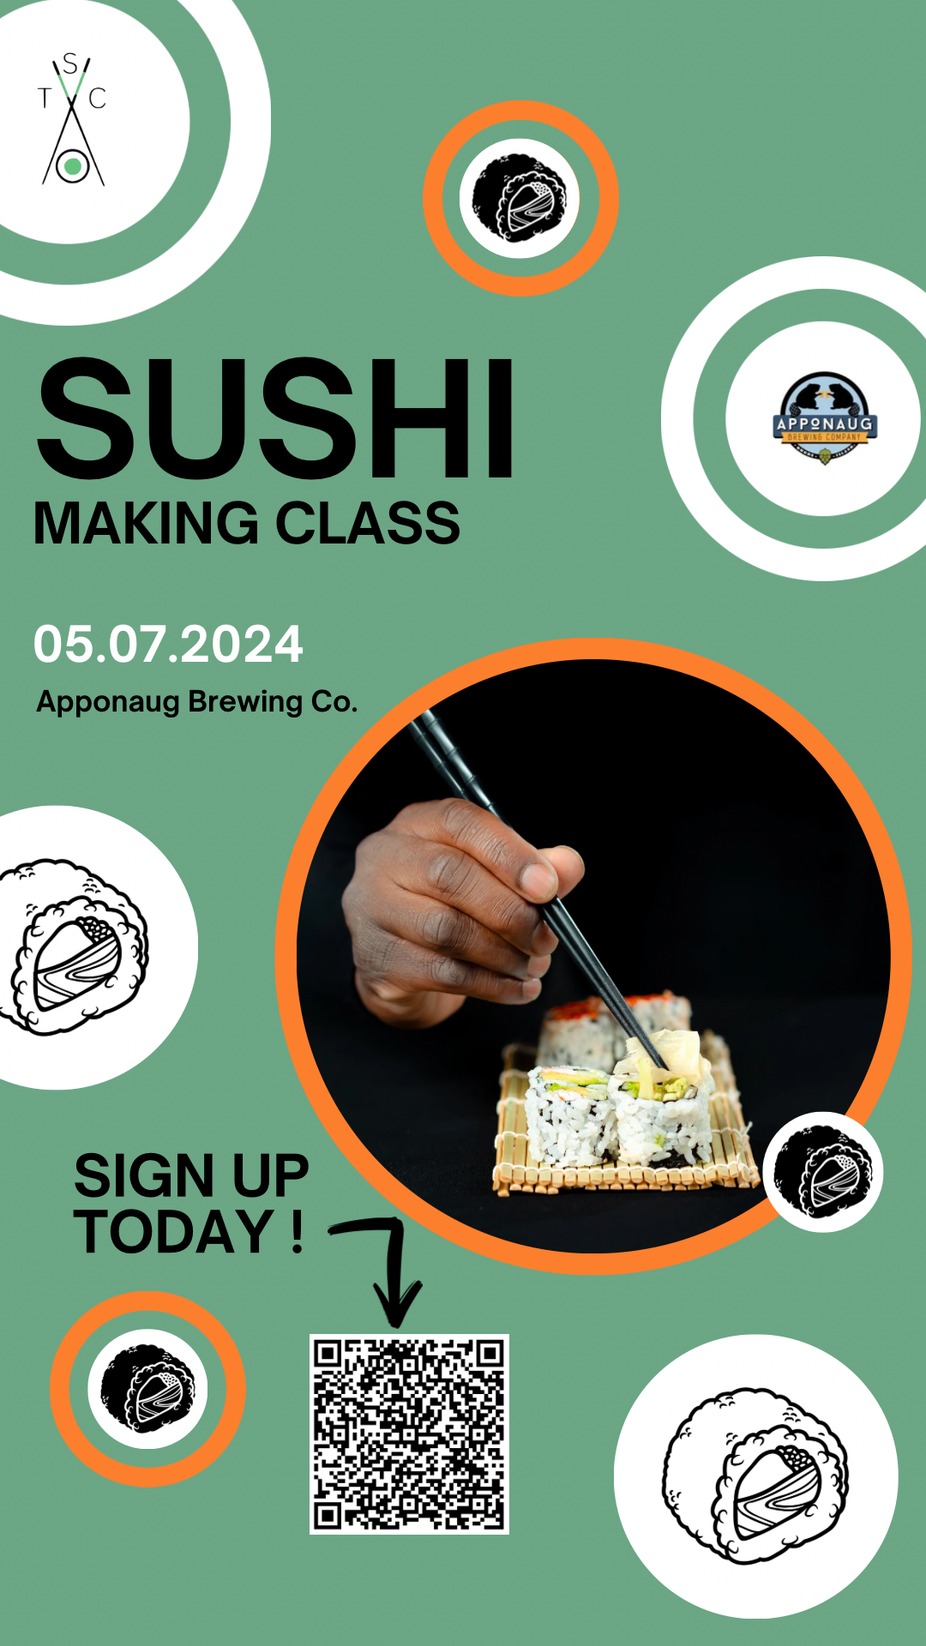 The Sushi Class event photo